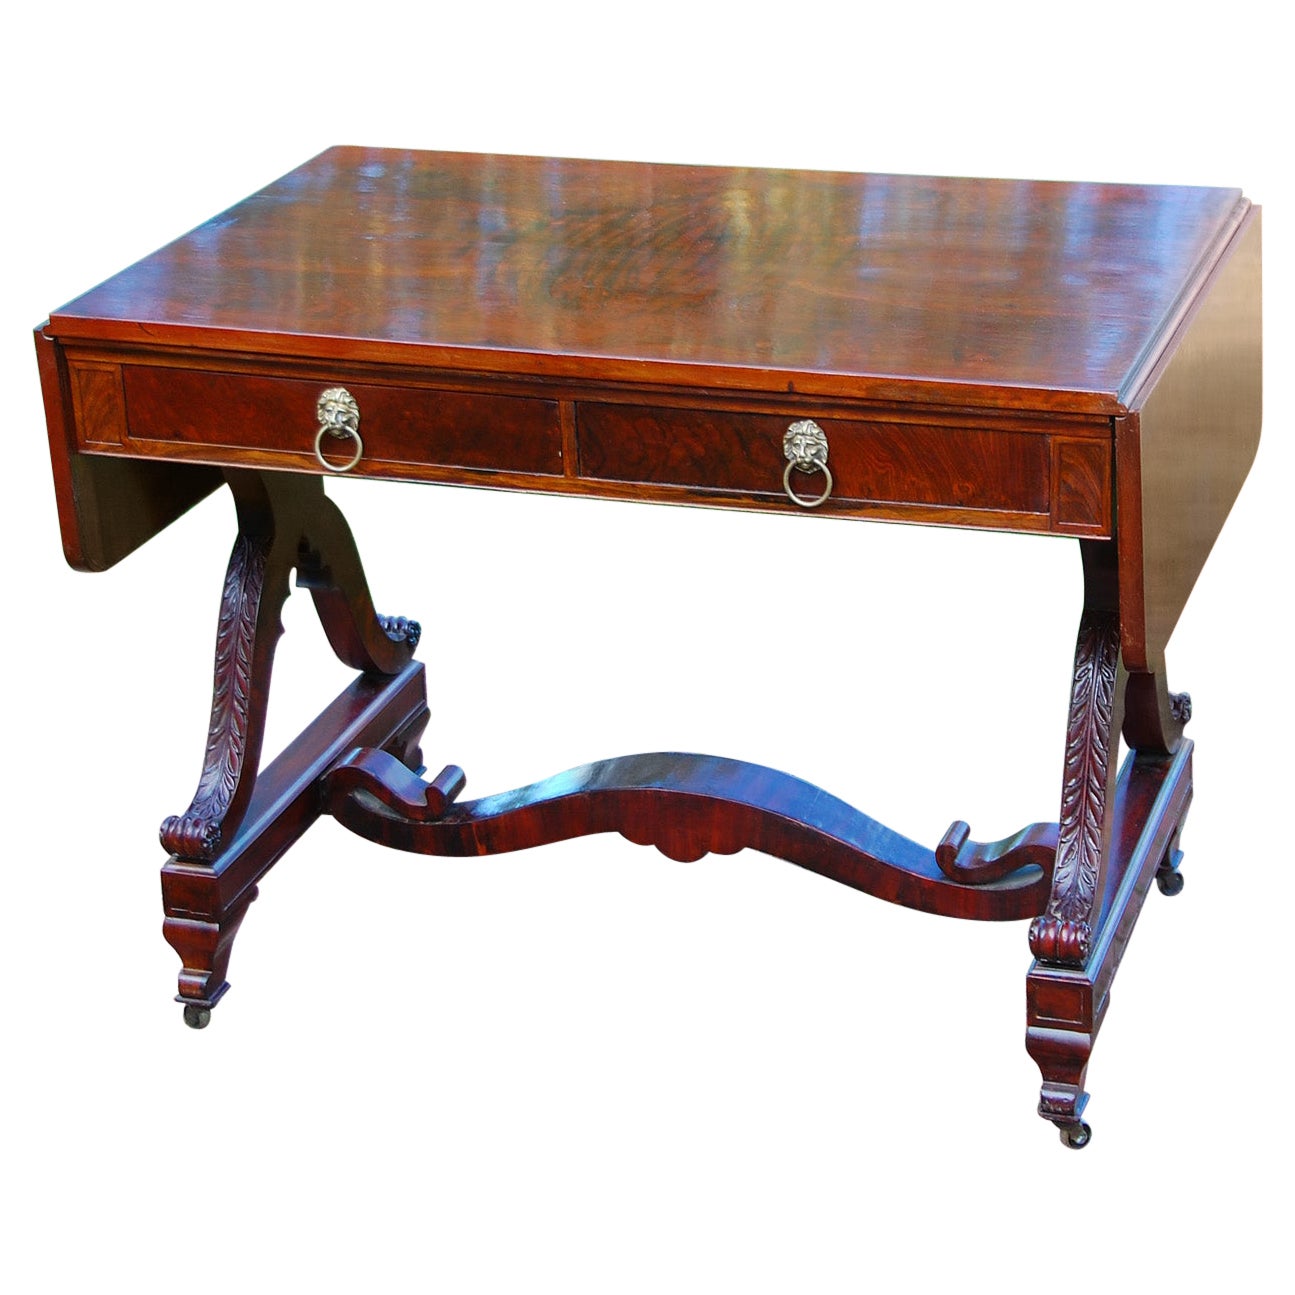 American Federal Period Rosewood Sofa Table with Acanthus Leaf Carving